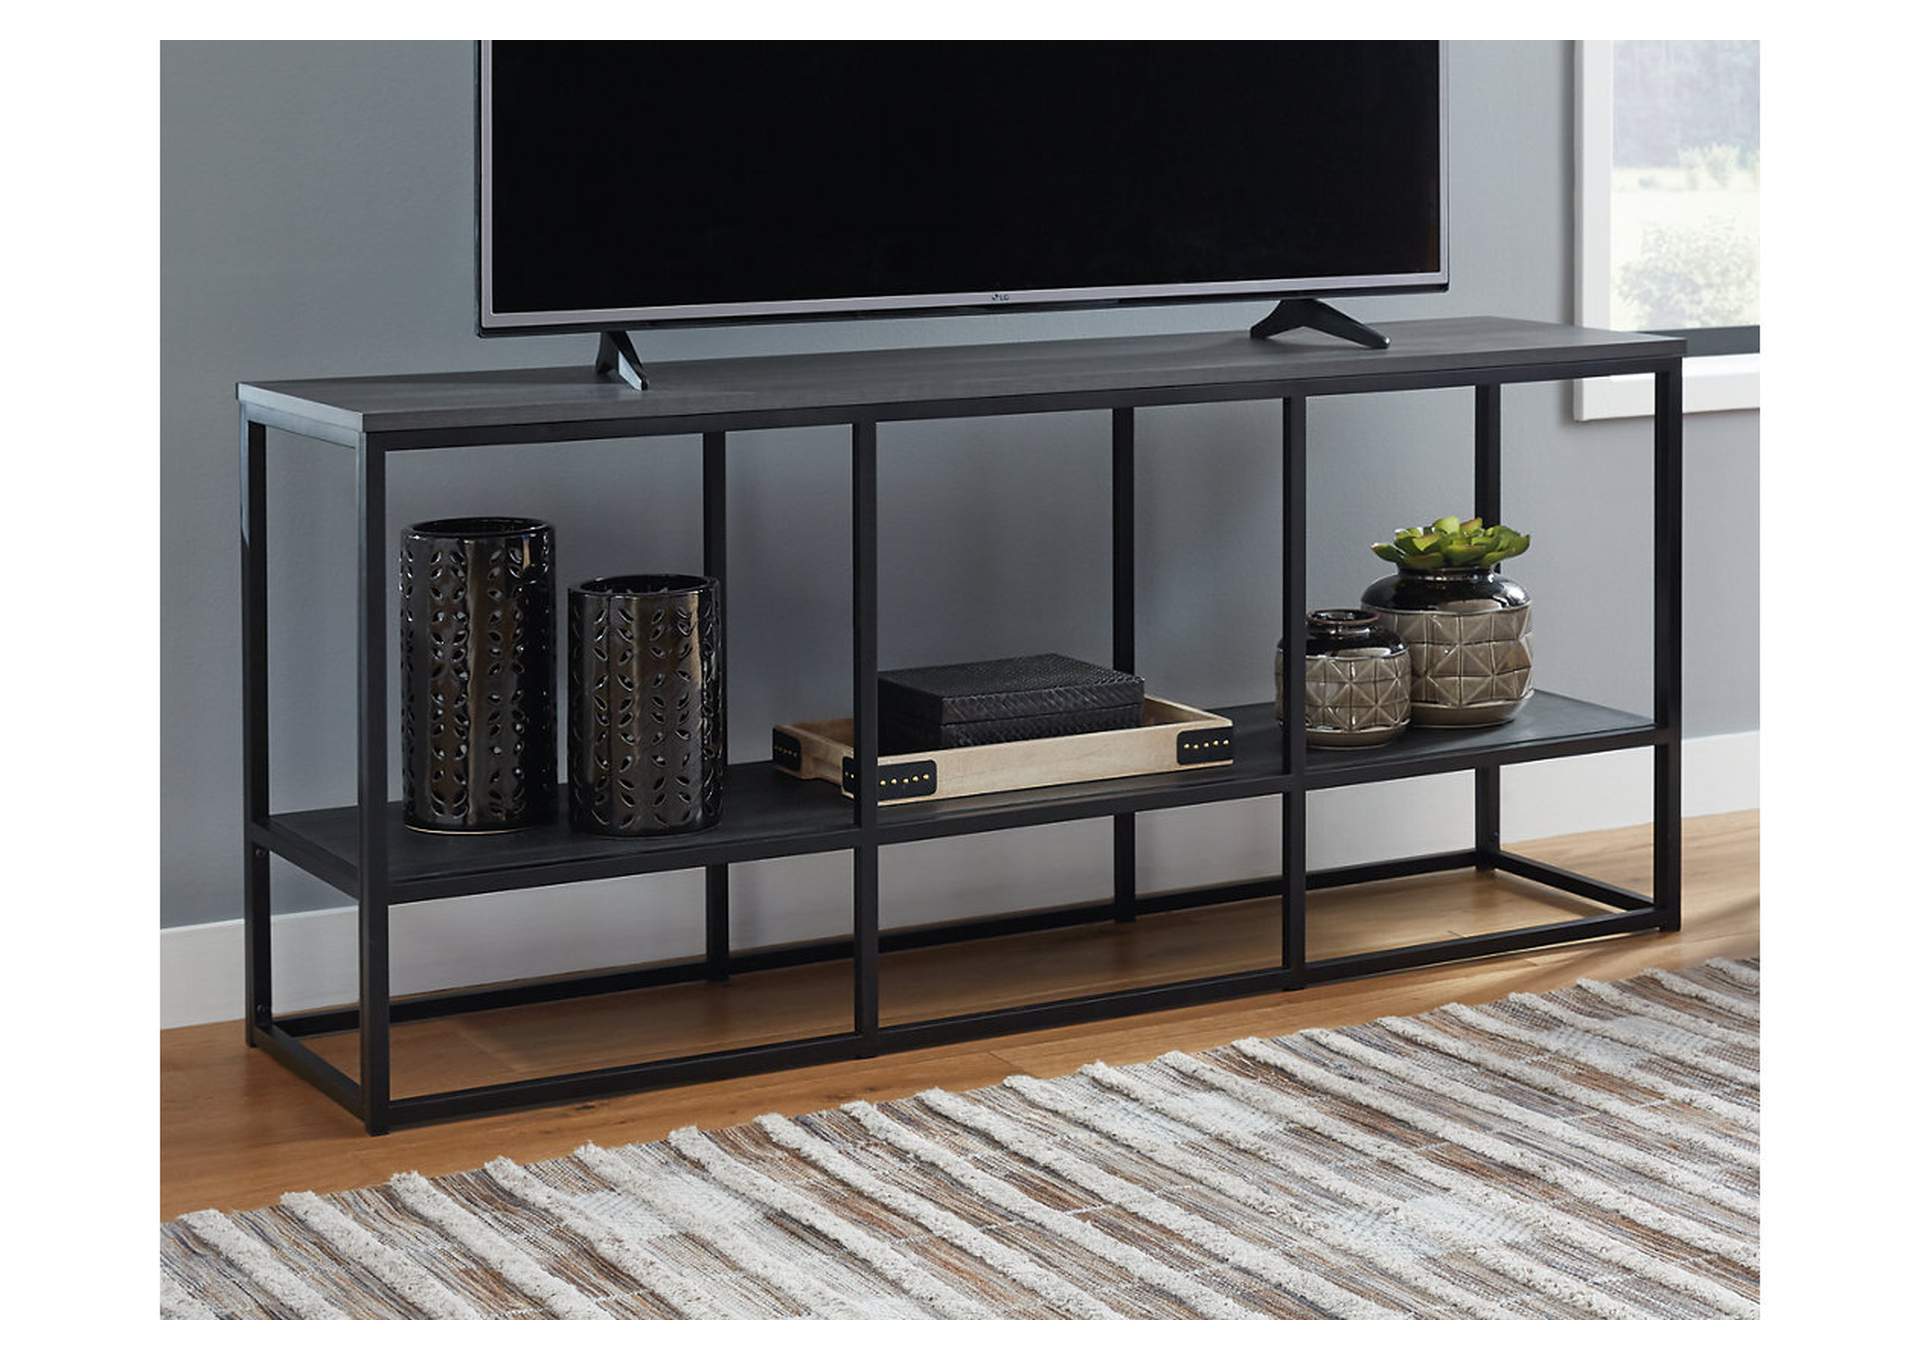 Yarlow 65" TV Stand,Signature Design By Ashley